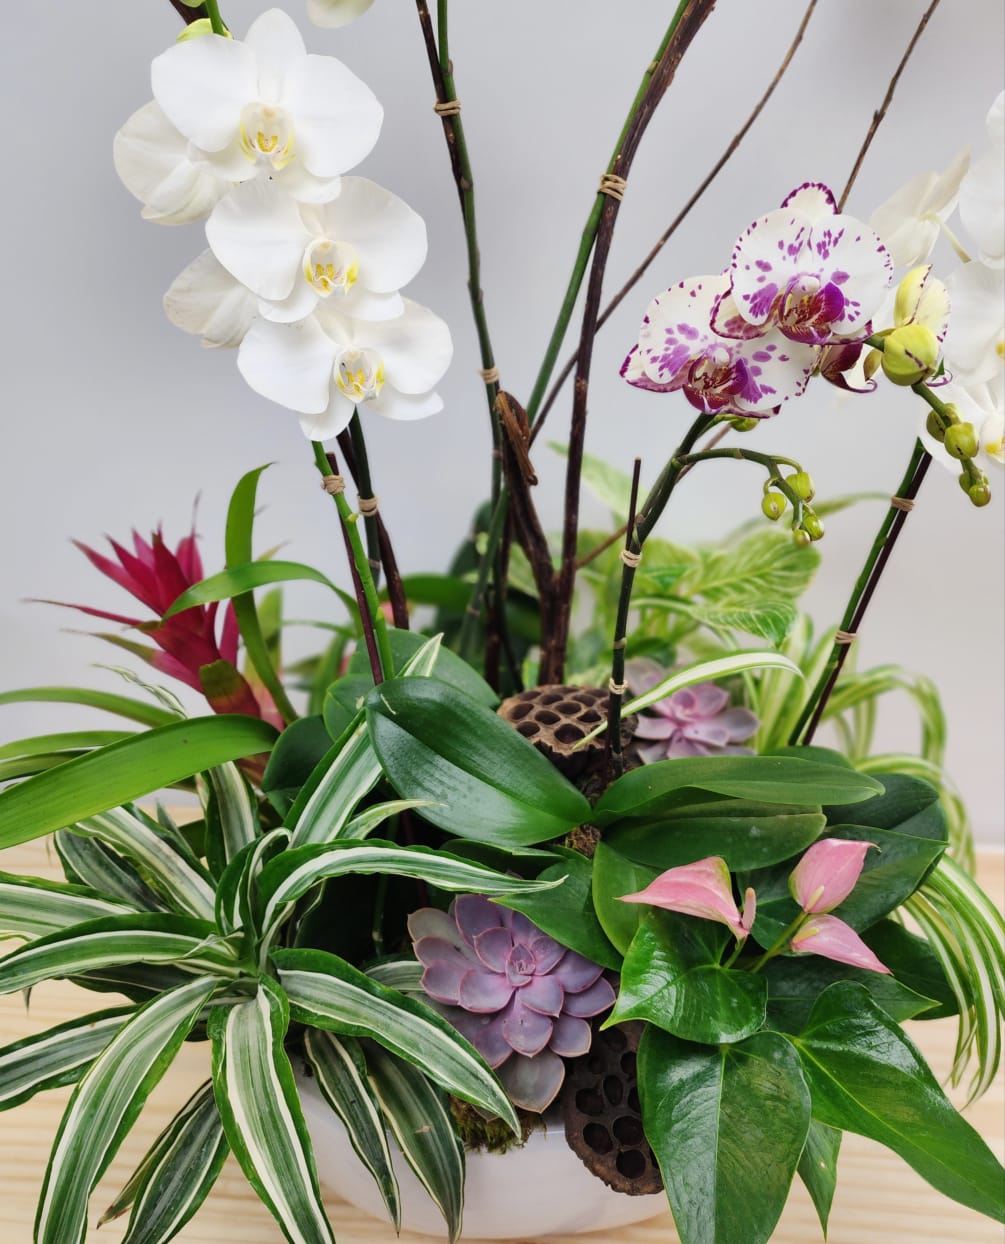 Let us create an amazing display of live orchid plants, green plants